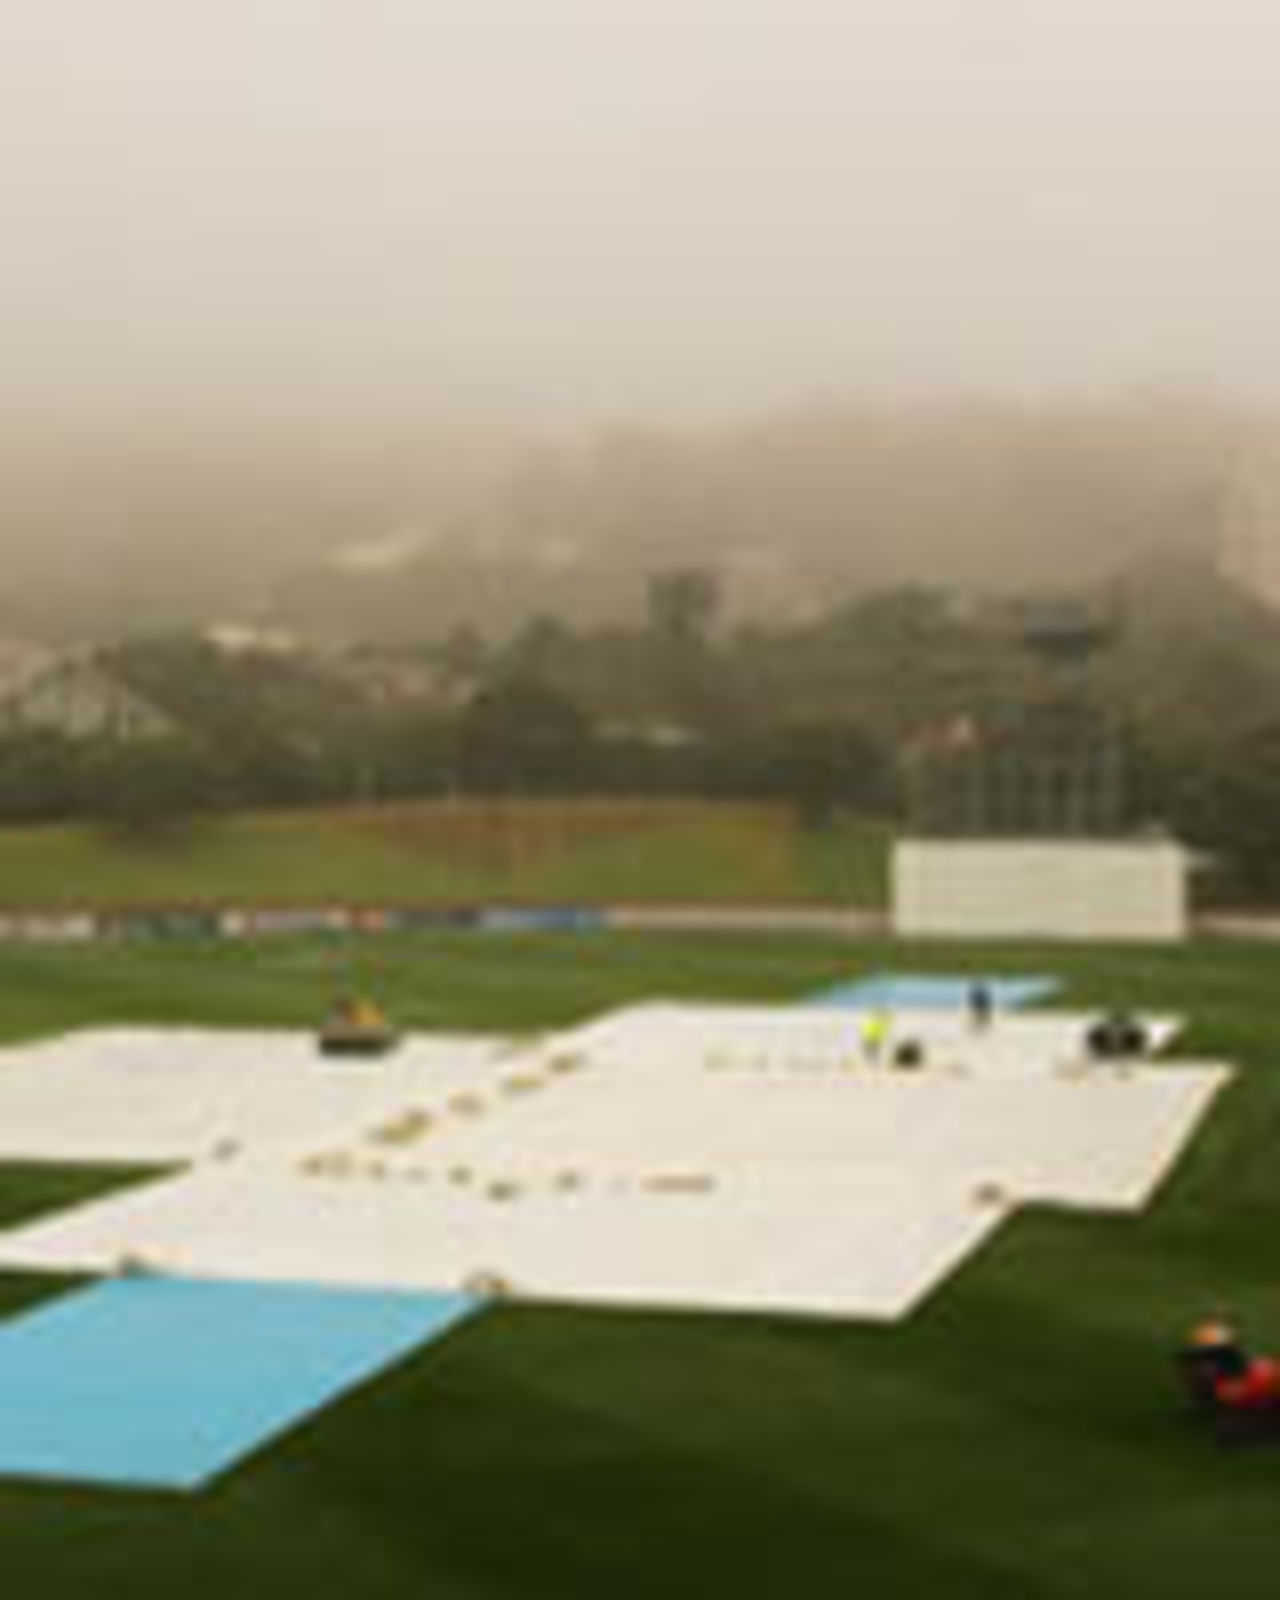 The pitch under the covers, New Zealand v Australia, 2nd Test, 1st day, March 18, 2005